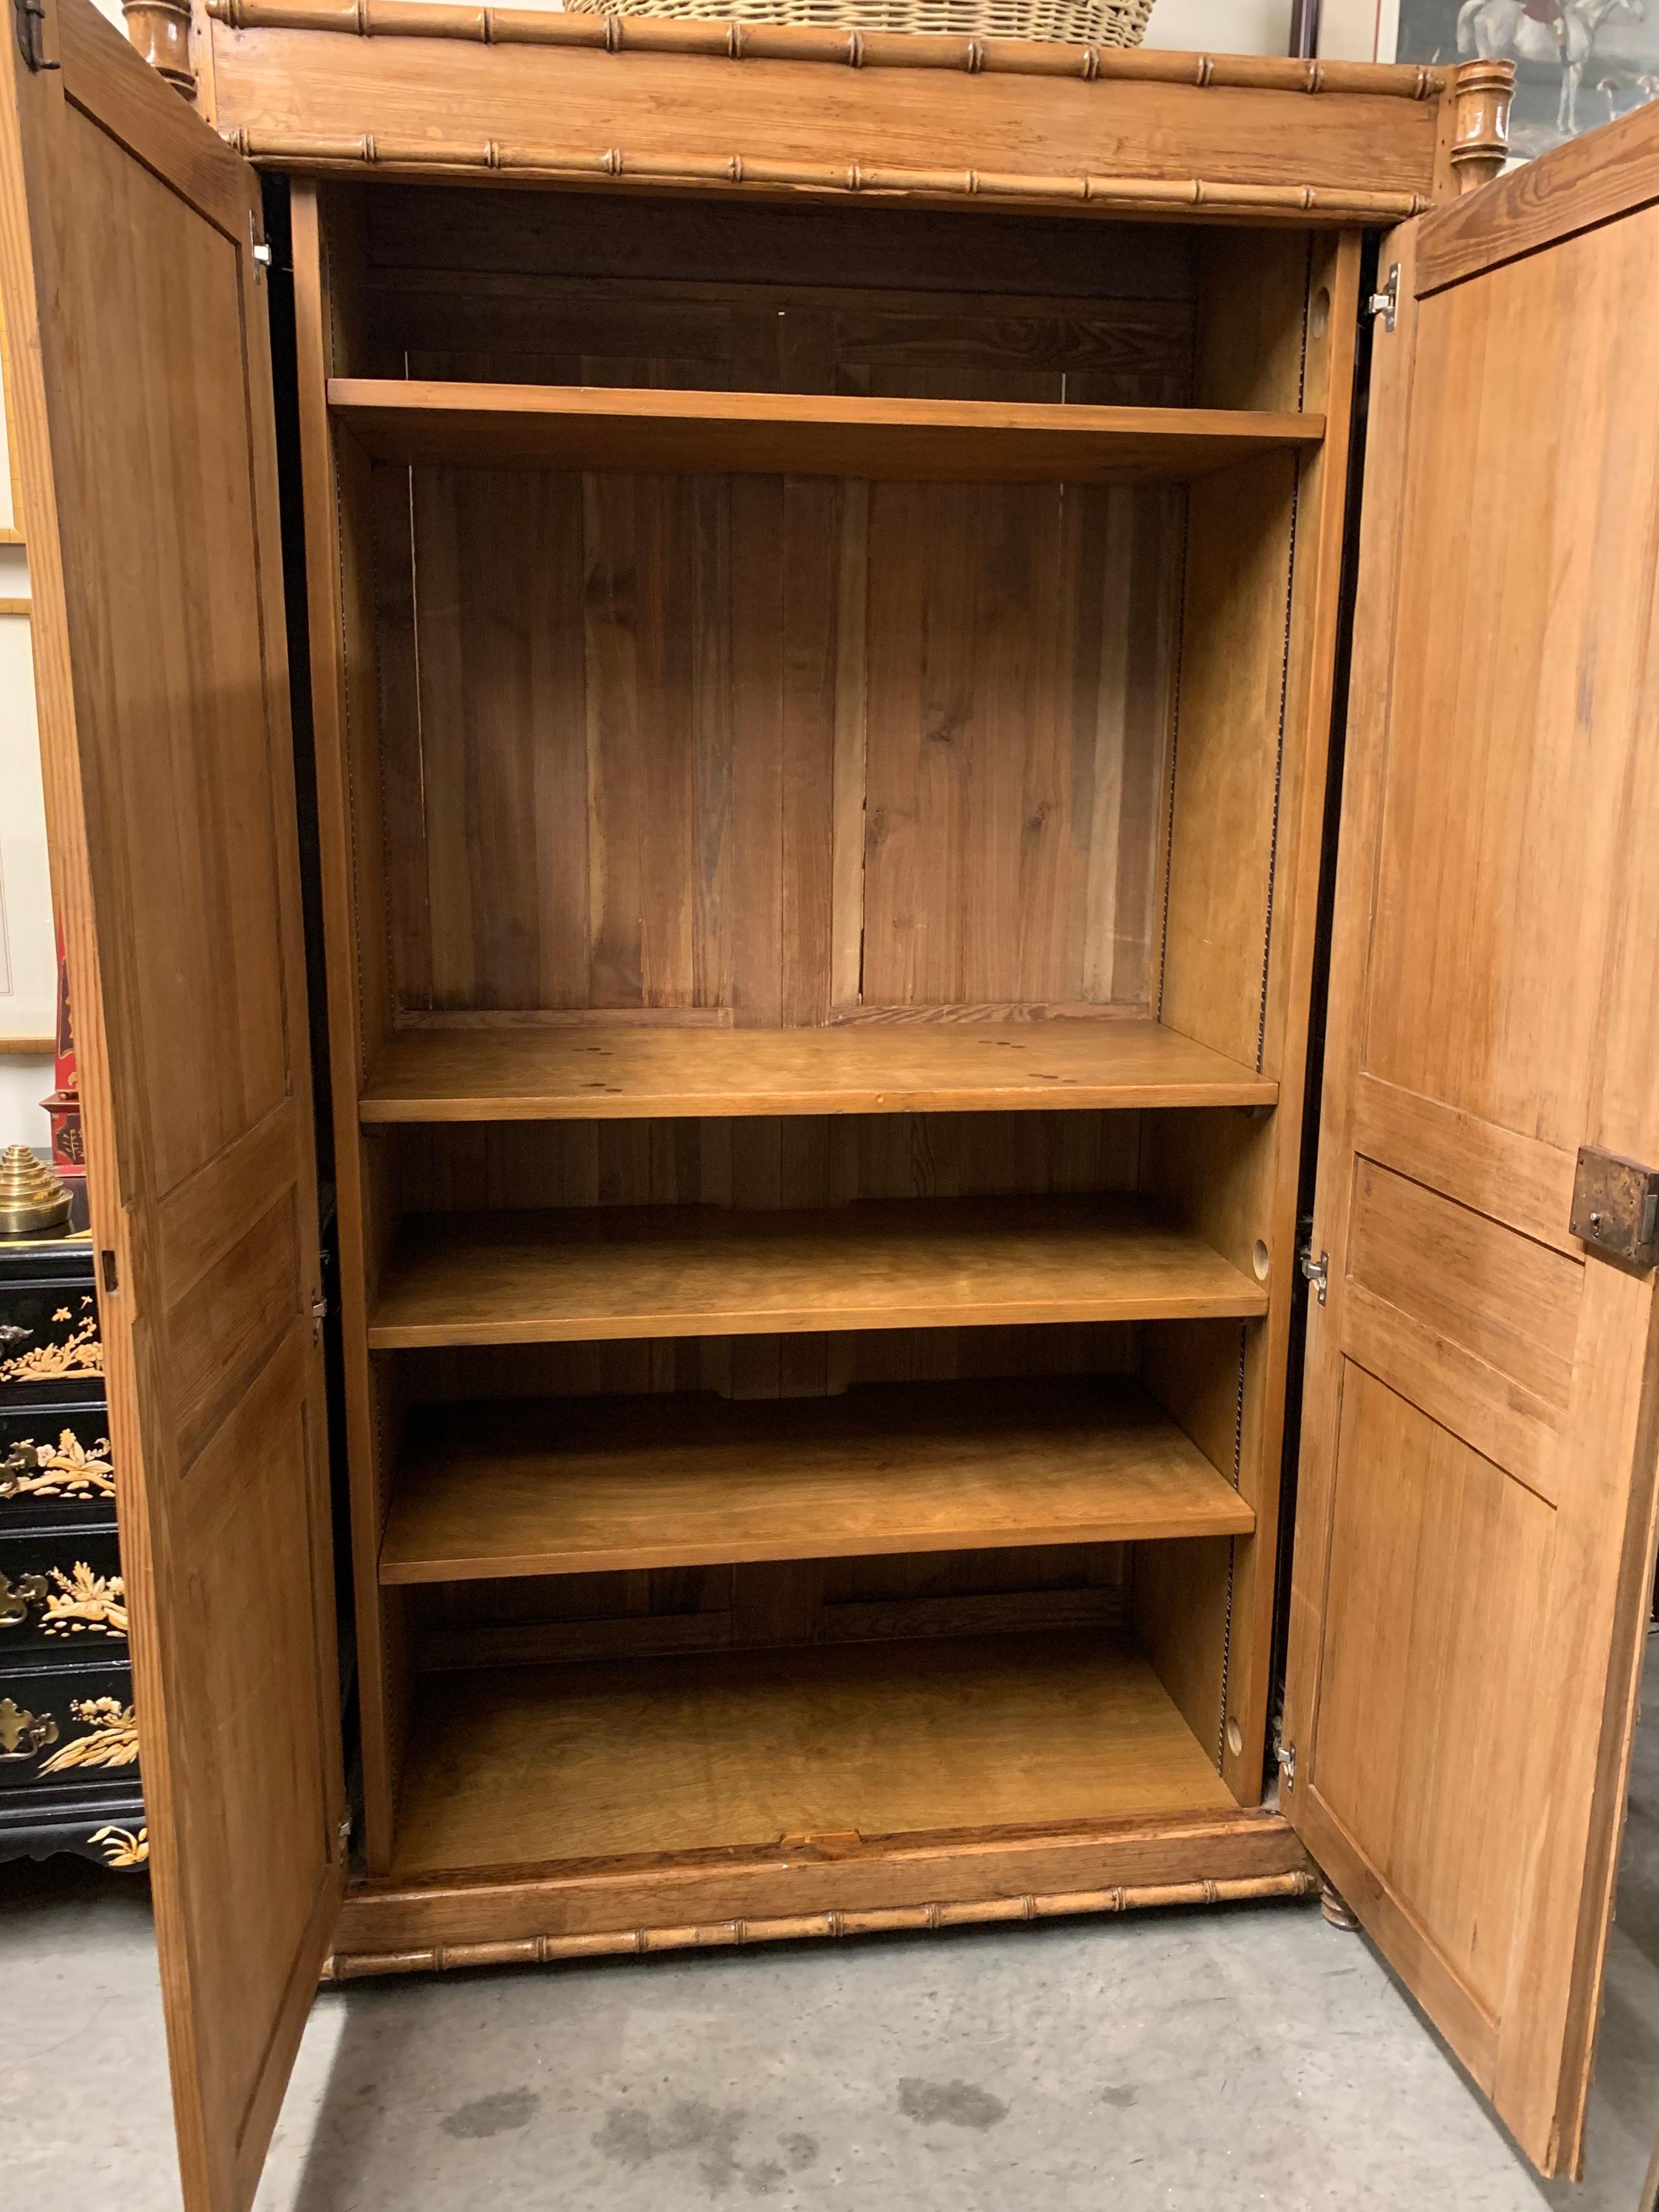 French pine antique two door armoire with faux bamboo turnings. The doors have been altered so that they slide back into the sides of the armoire. The interior has been fitted with strong shelving originally to house a television. The top and bottom